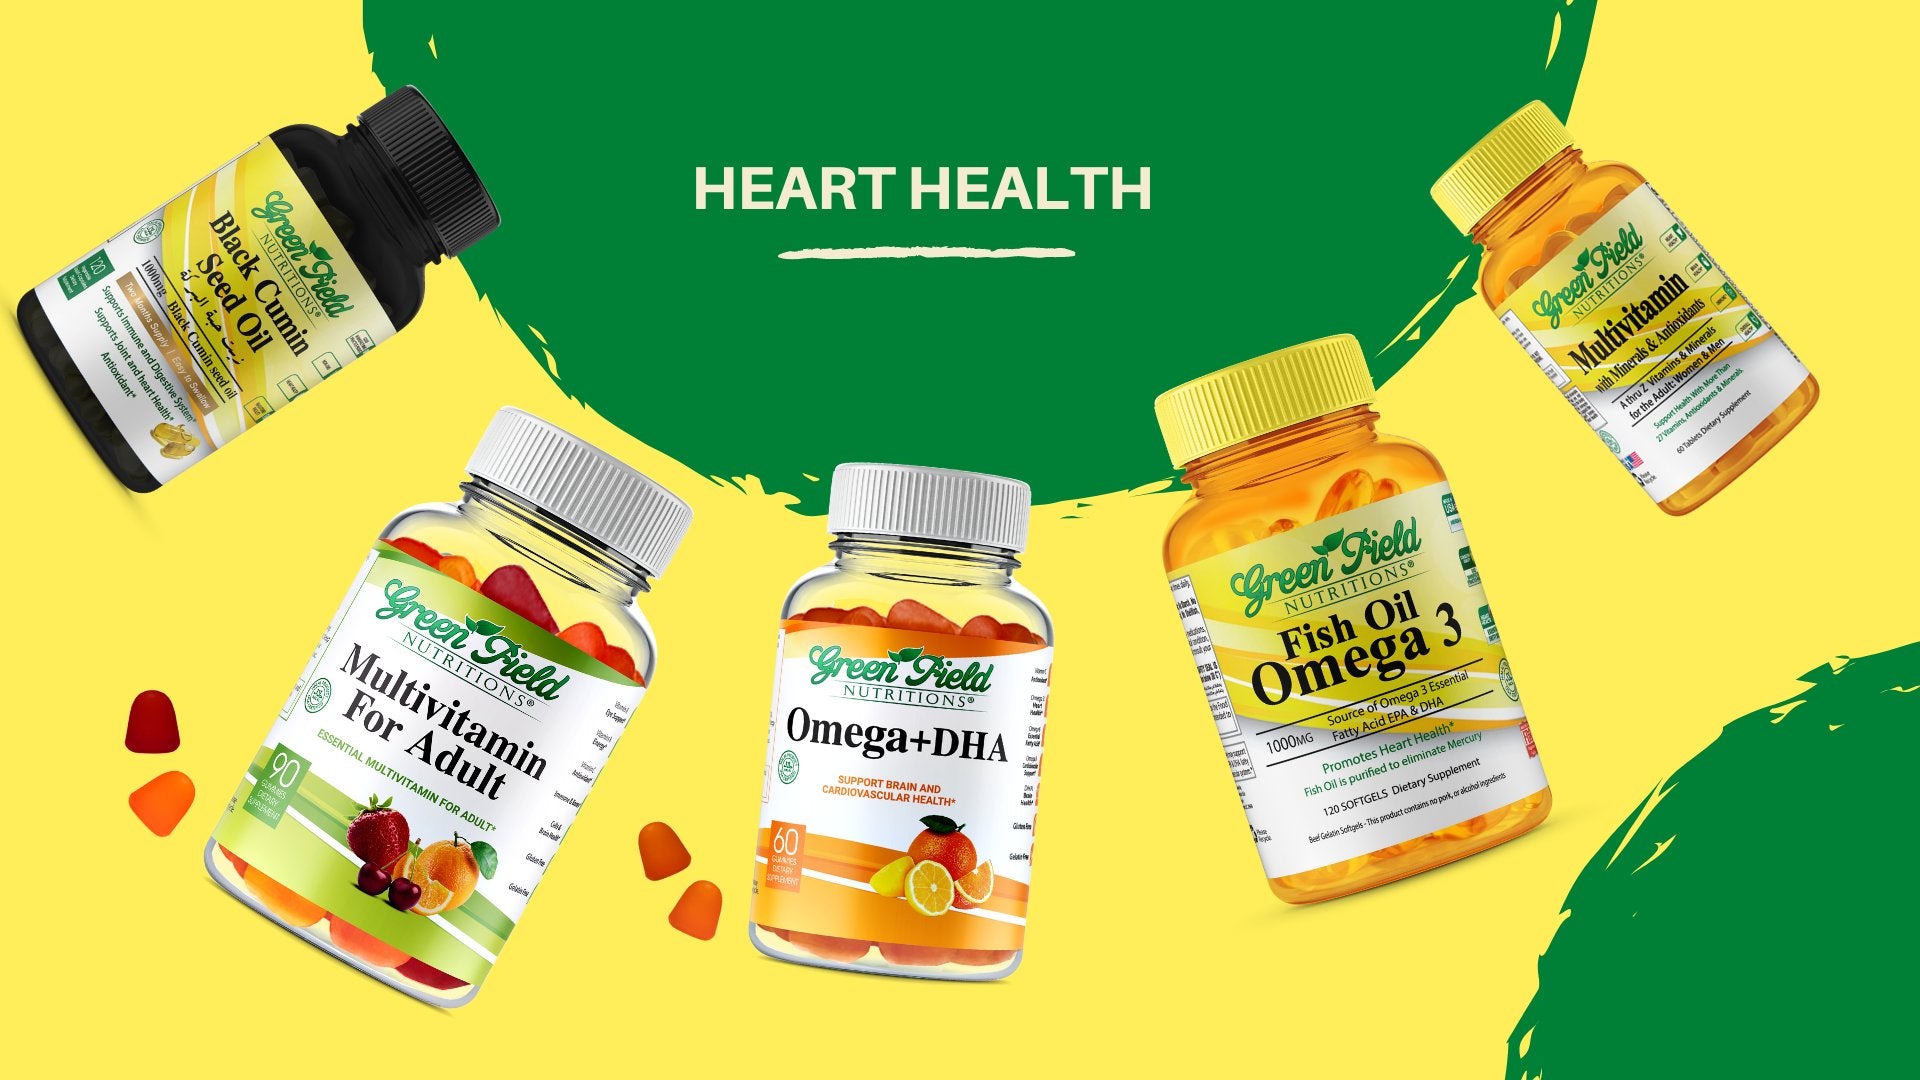 Greenfield Nutritions Halal Vitamins for Heart Health Support